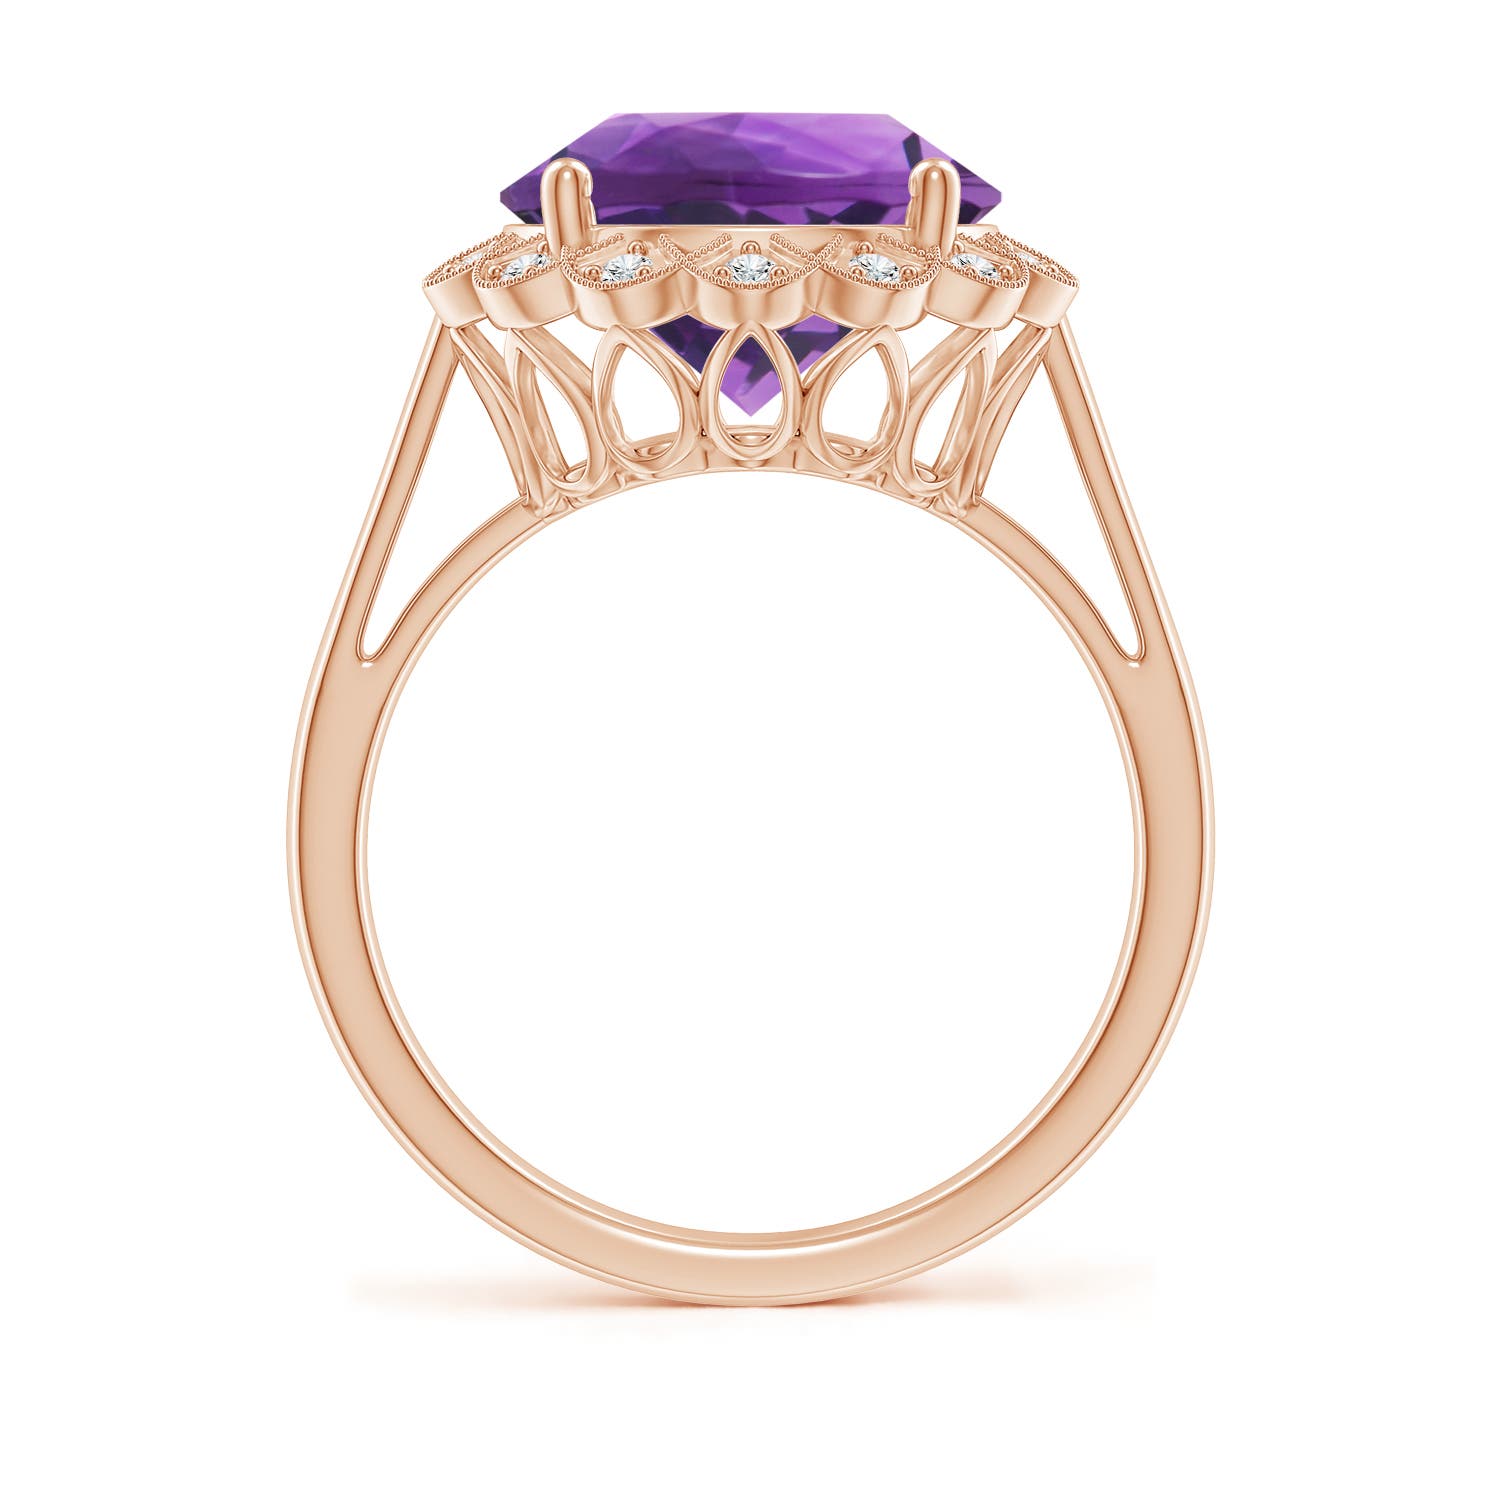 AAA- Amethyst / 4.86 CT / 14 KT Rose Gold